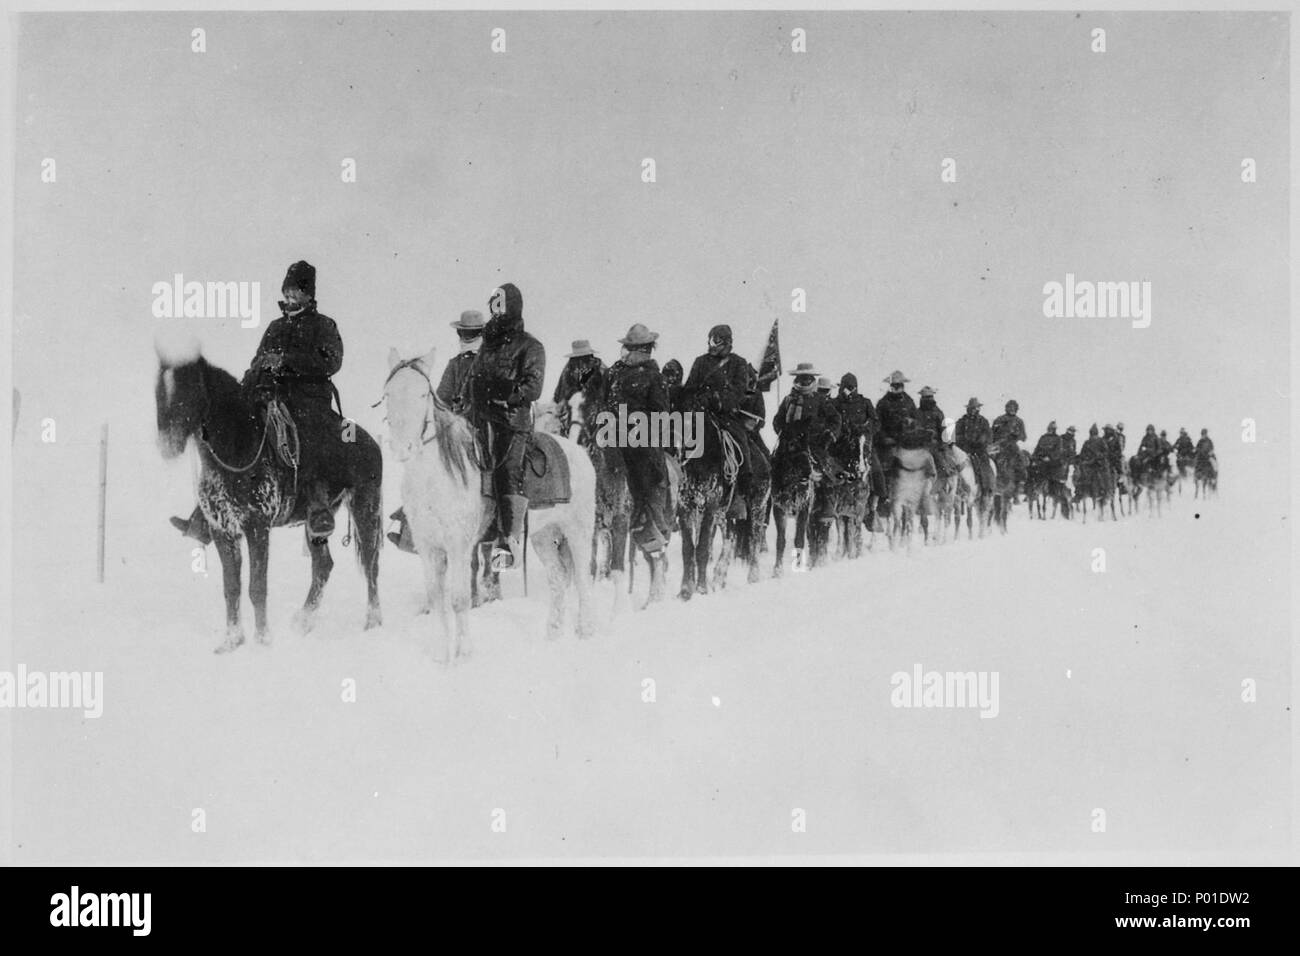 Return of Casey's scouts from the fight at Wounded Knee, 1890-91. Soldiers on horseback plod through the snow - Stock Photo